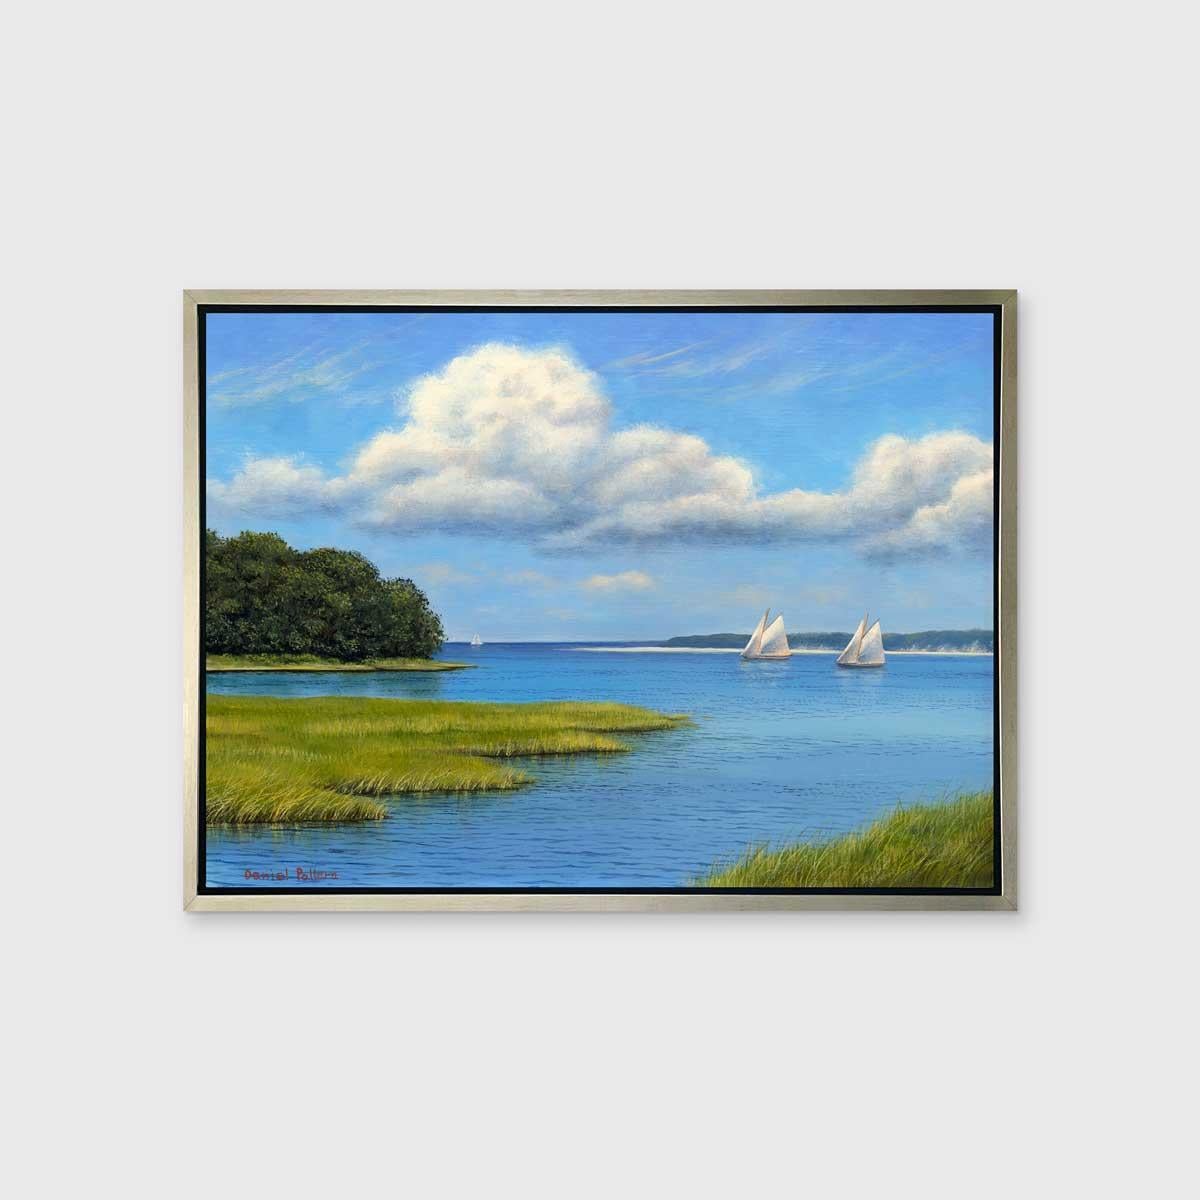 This traditional seascape Limited Edition print by Daniel Pollera captures a coastal summer scene with swaying grass in what appears to be a bay. Sailboats with white sails are visible along the horizon in bright blue water, which is mirrored by a